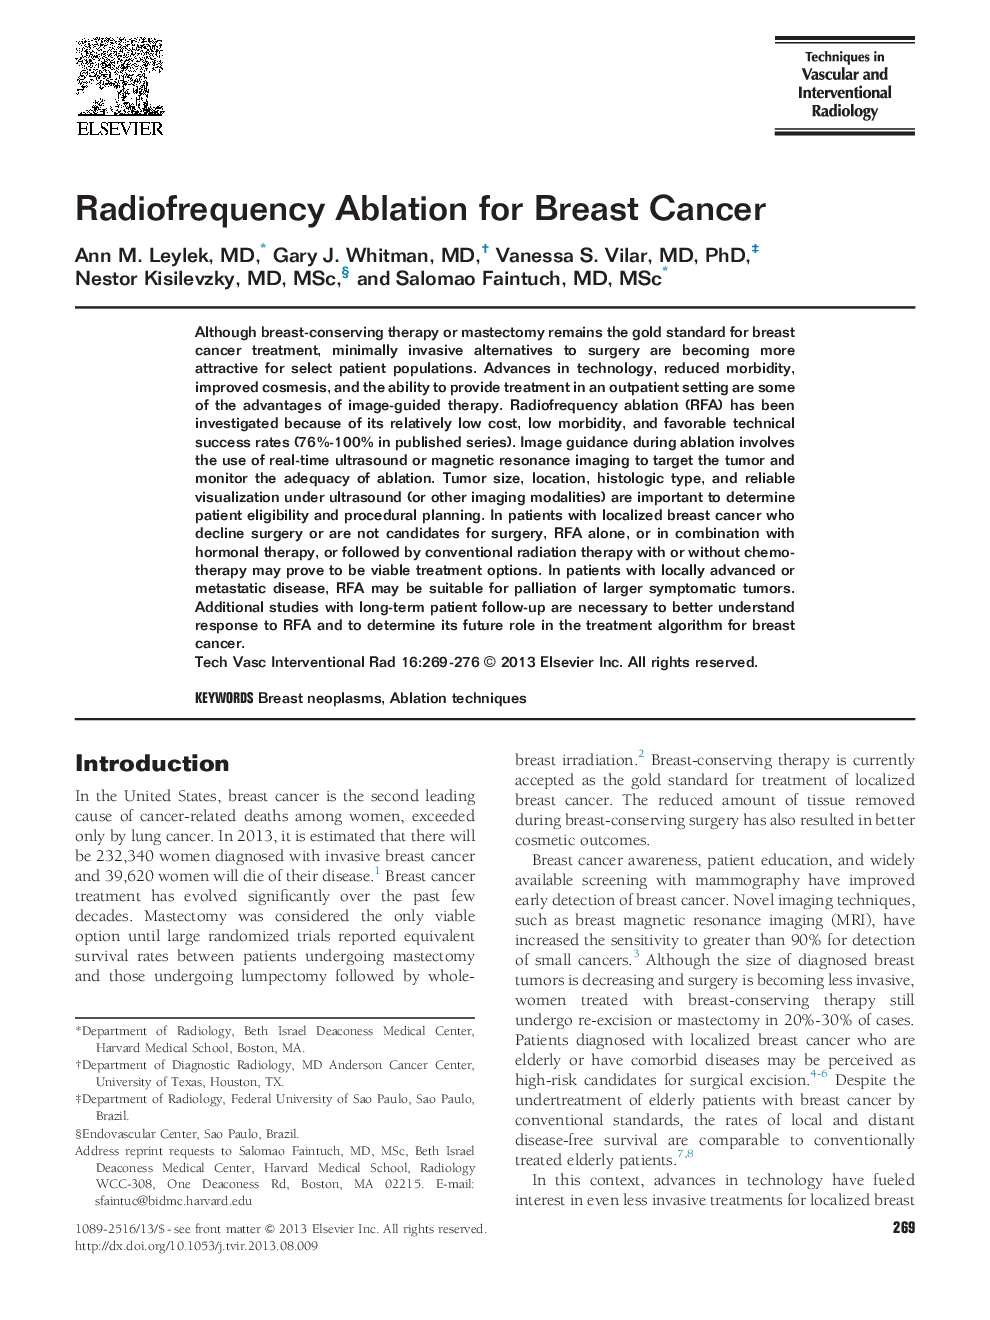 Radiofrequency Ablation for Breast Cancer